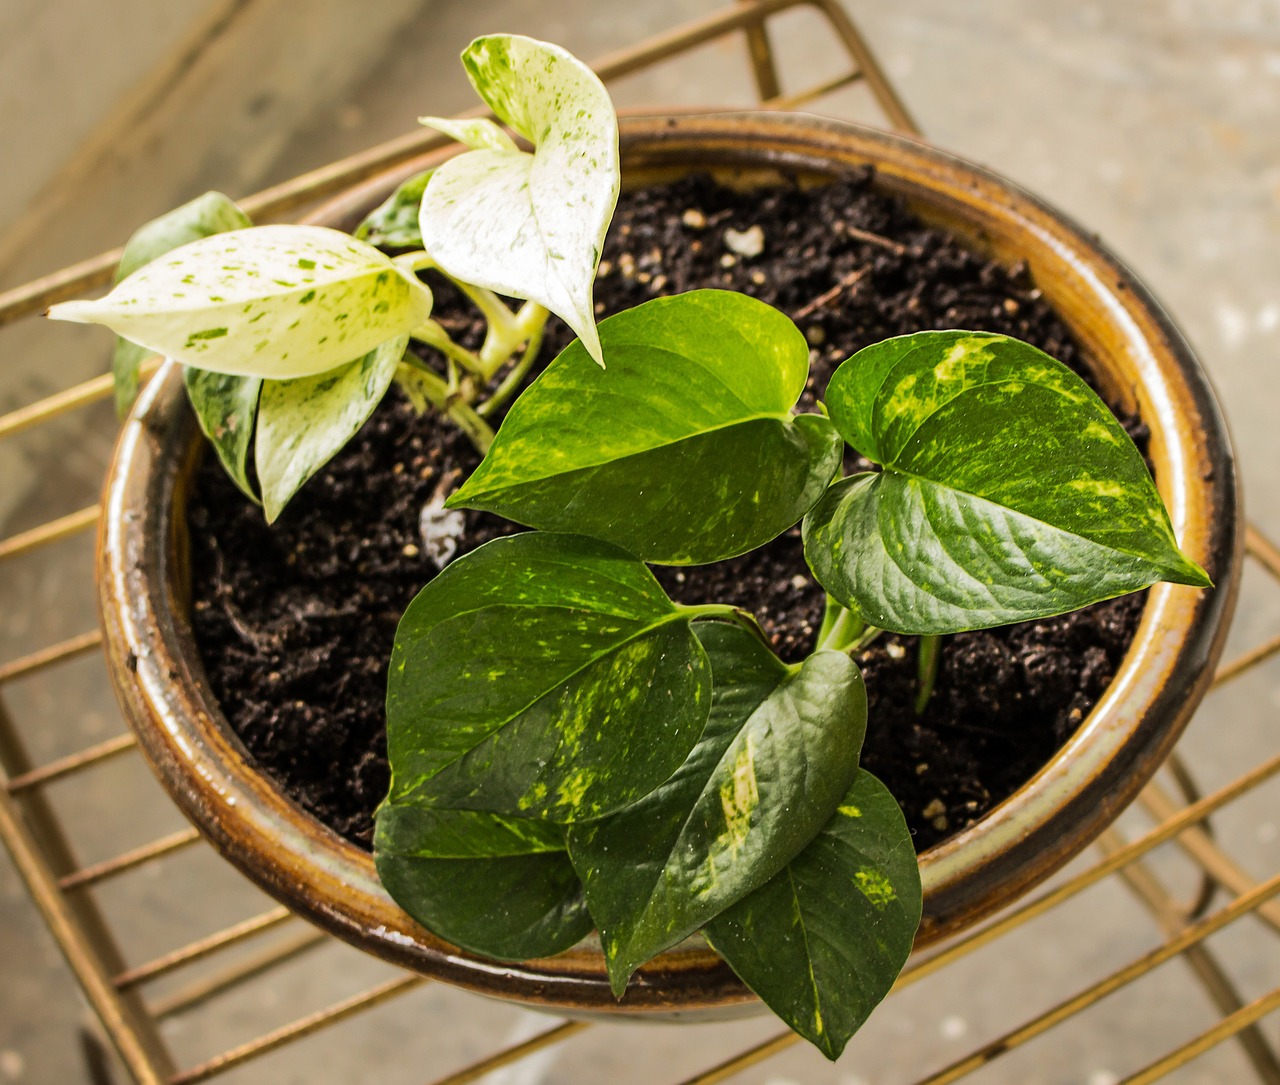 The 10 best houseplants for purifying indoor air